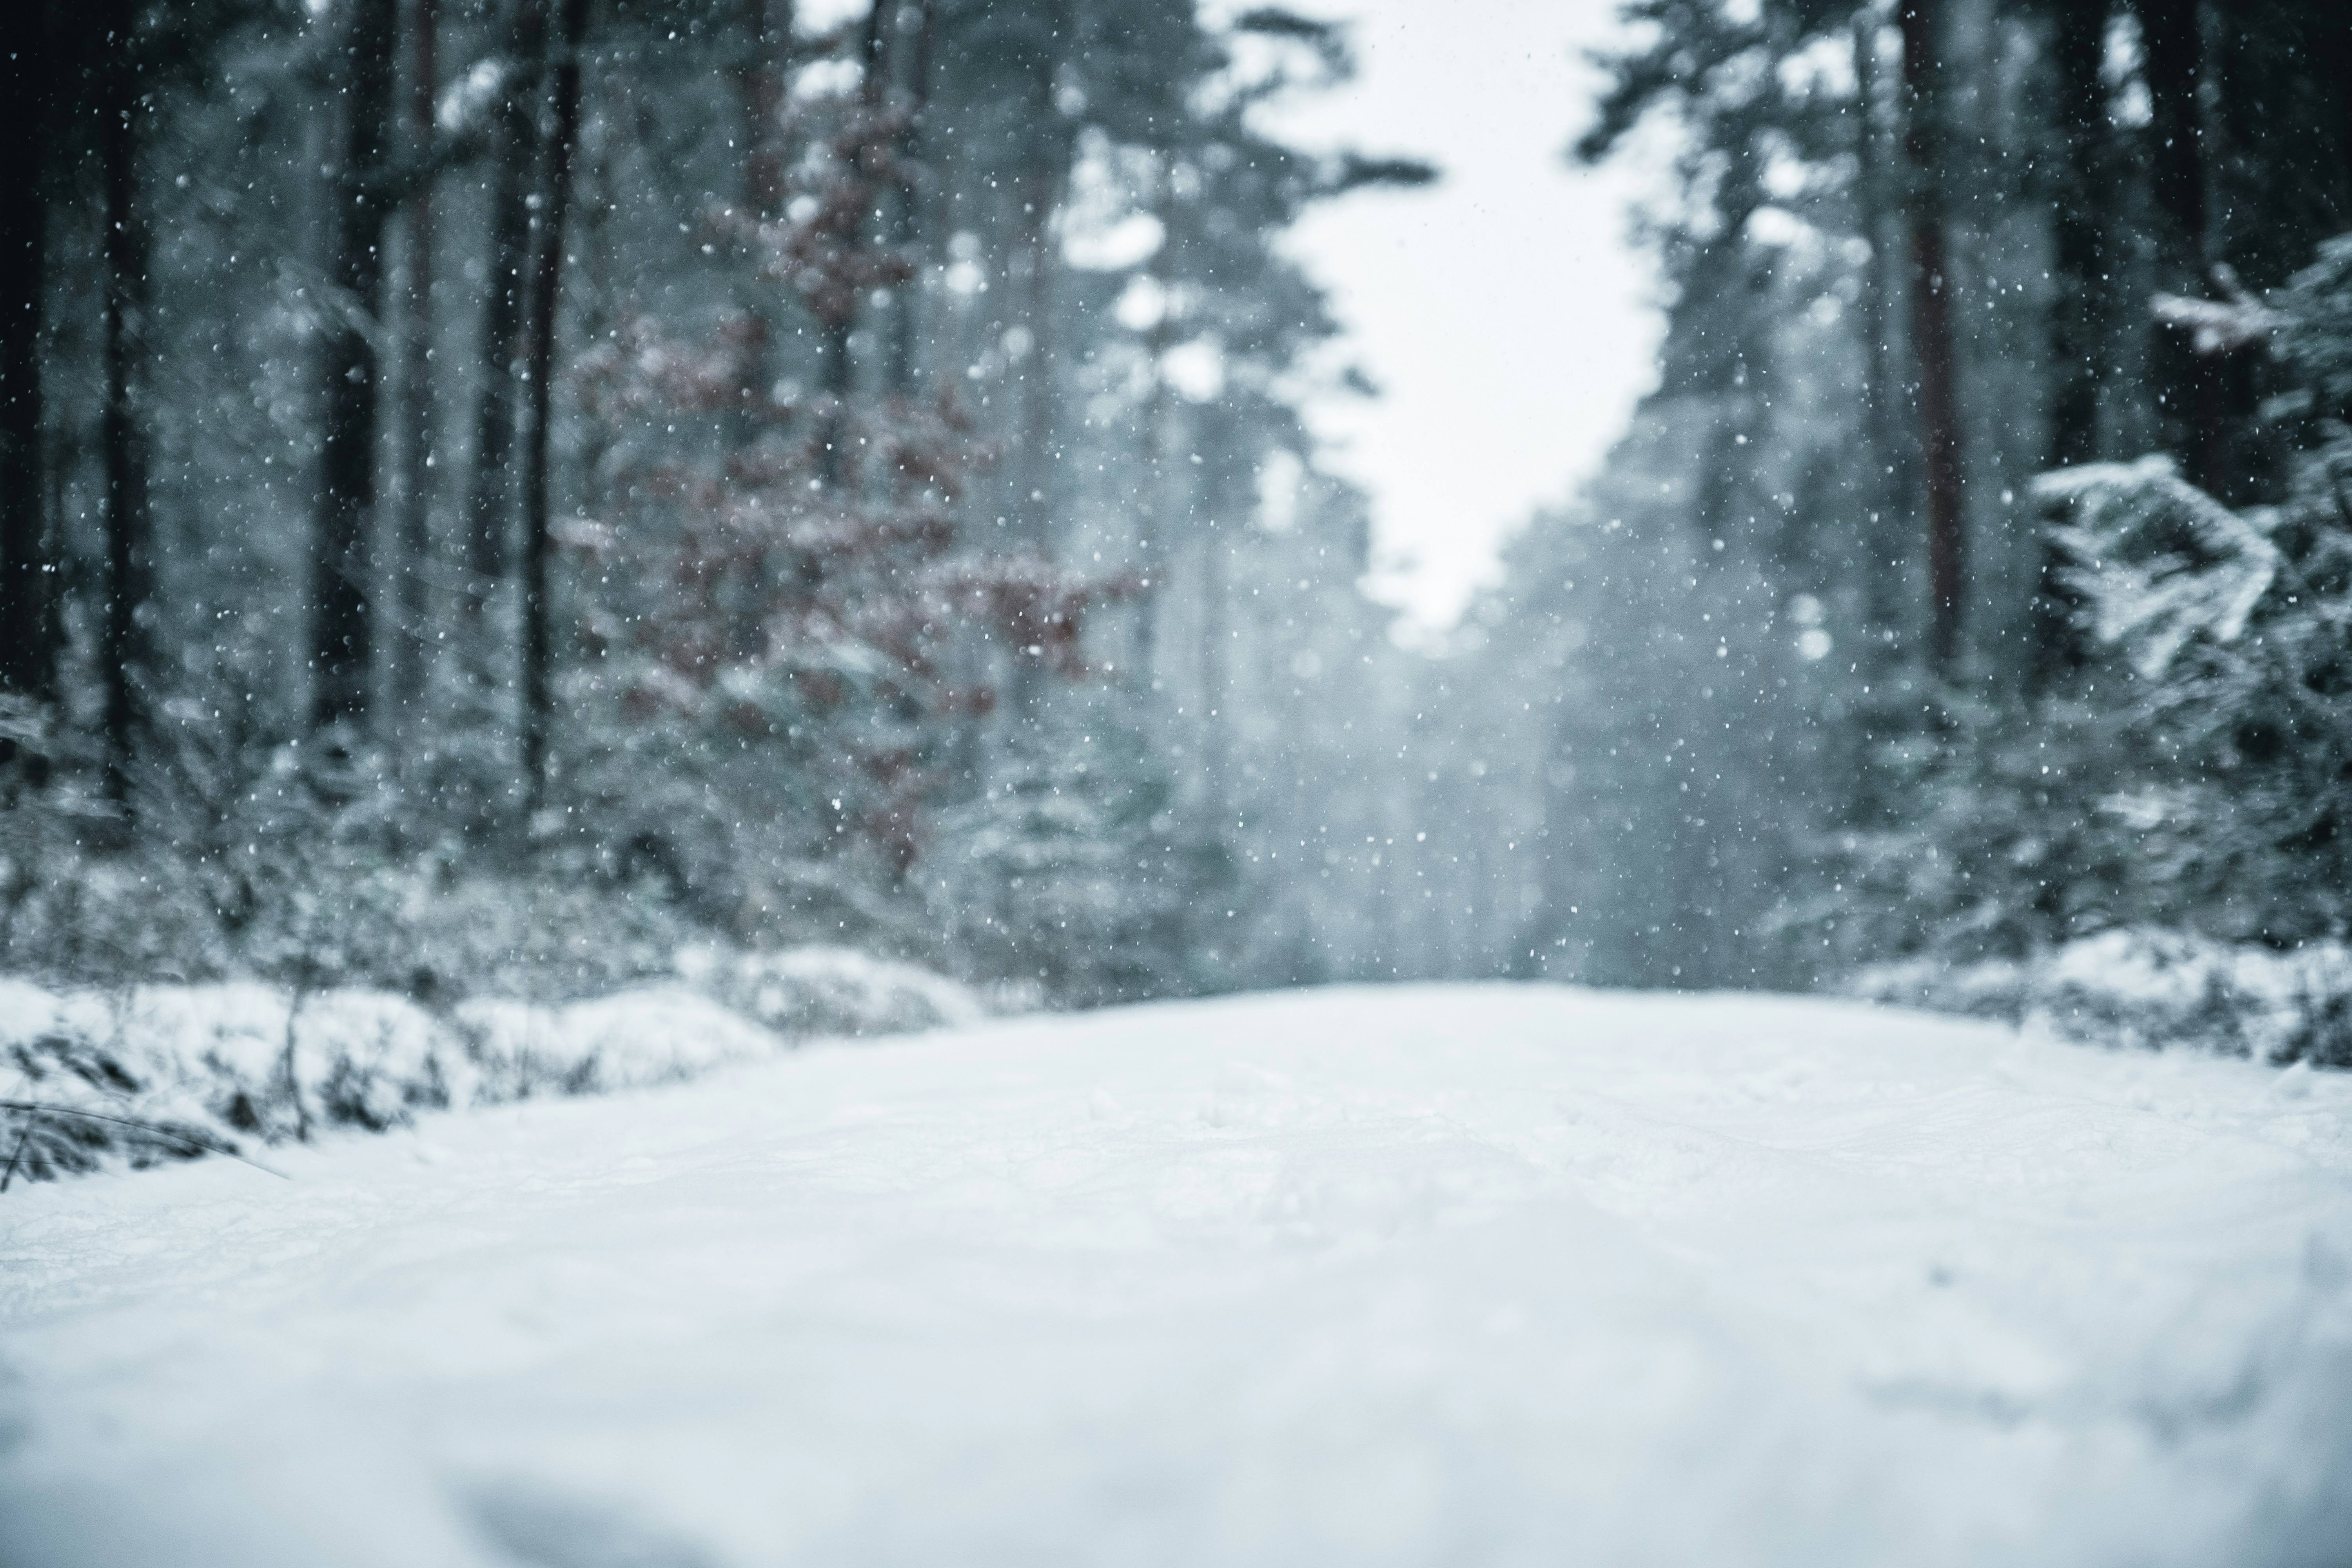 Choose from a curated selection of winter photos. Always free on Unsplash.